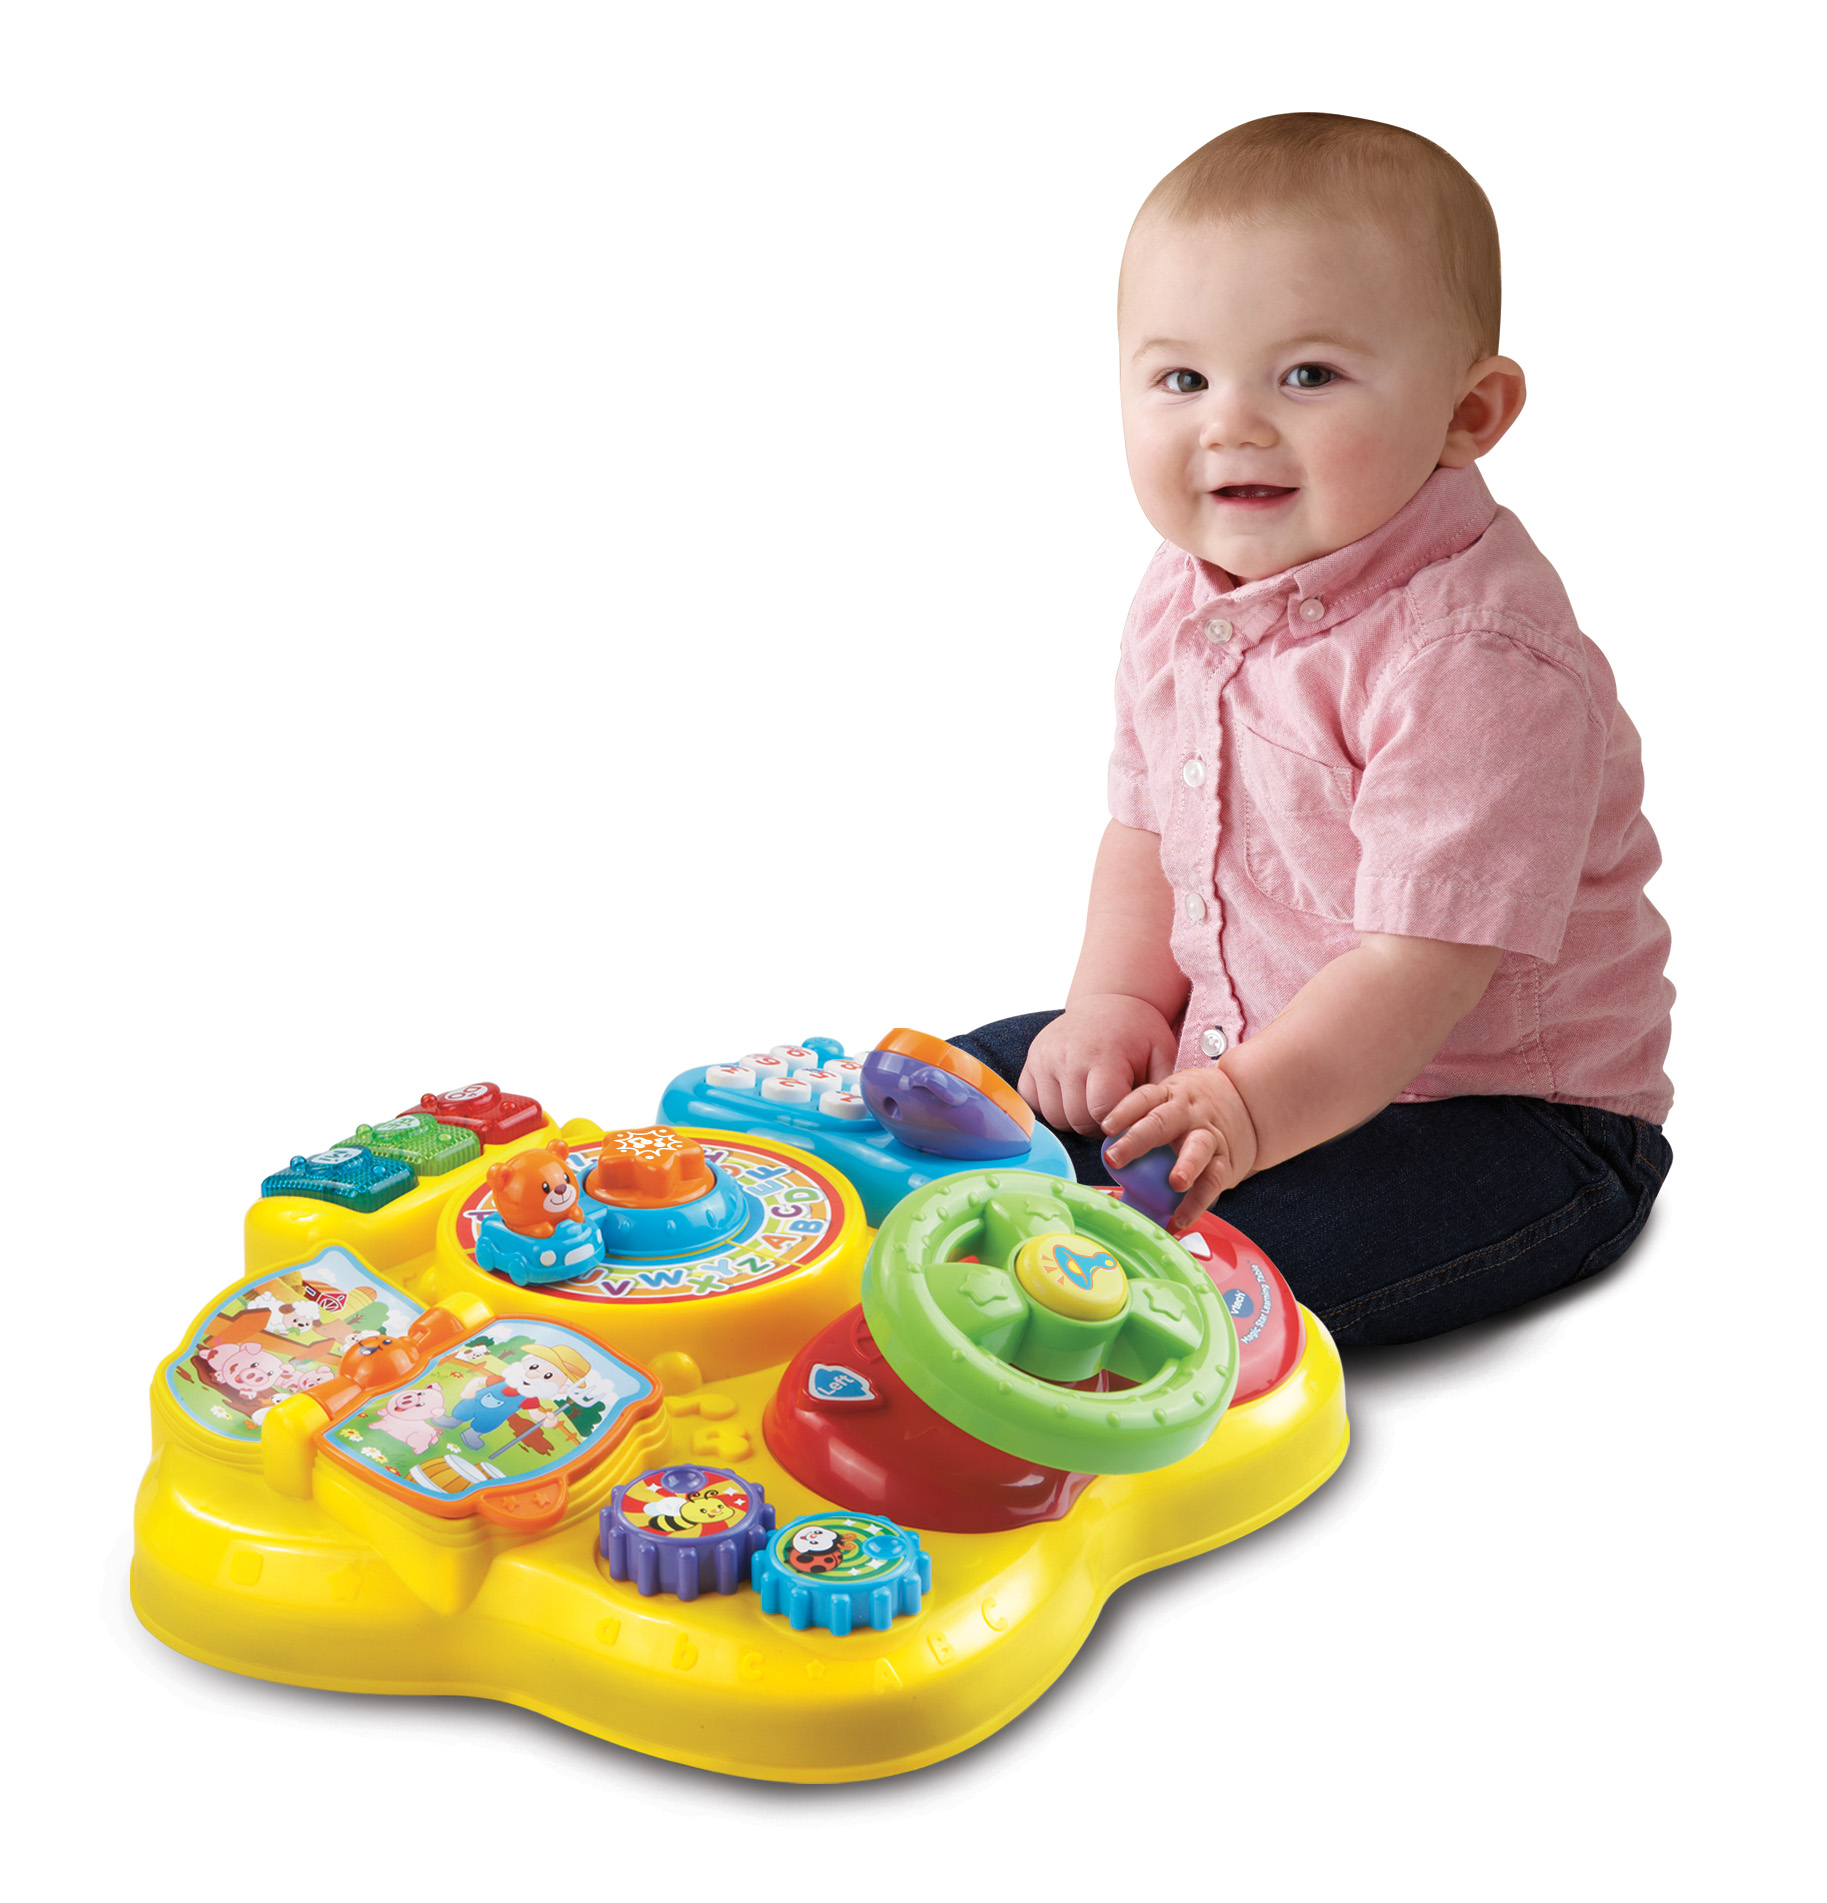 Magic Star Learning Table VTech - image 3 of 11